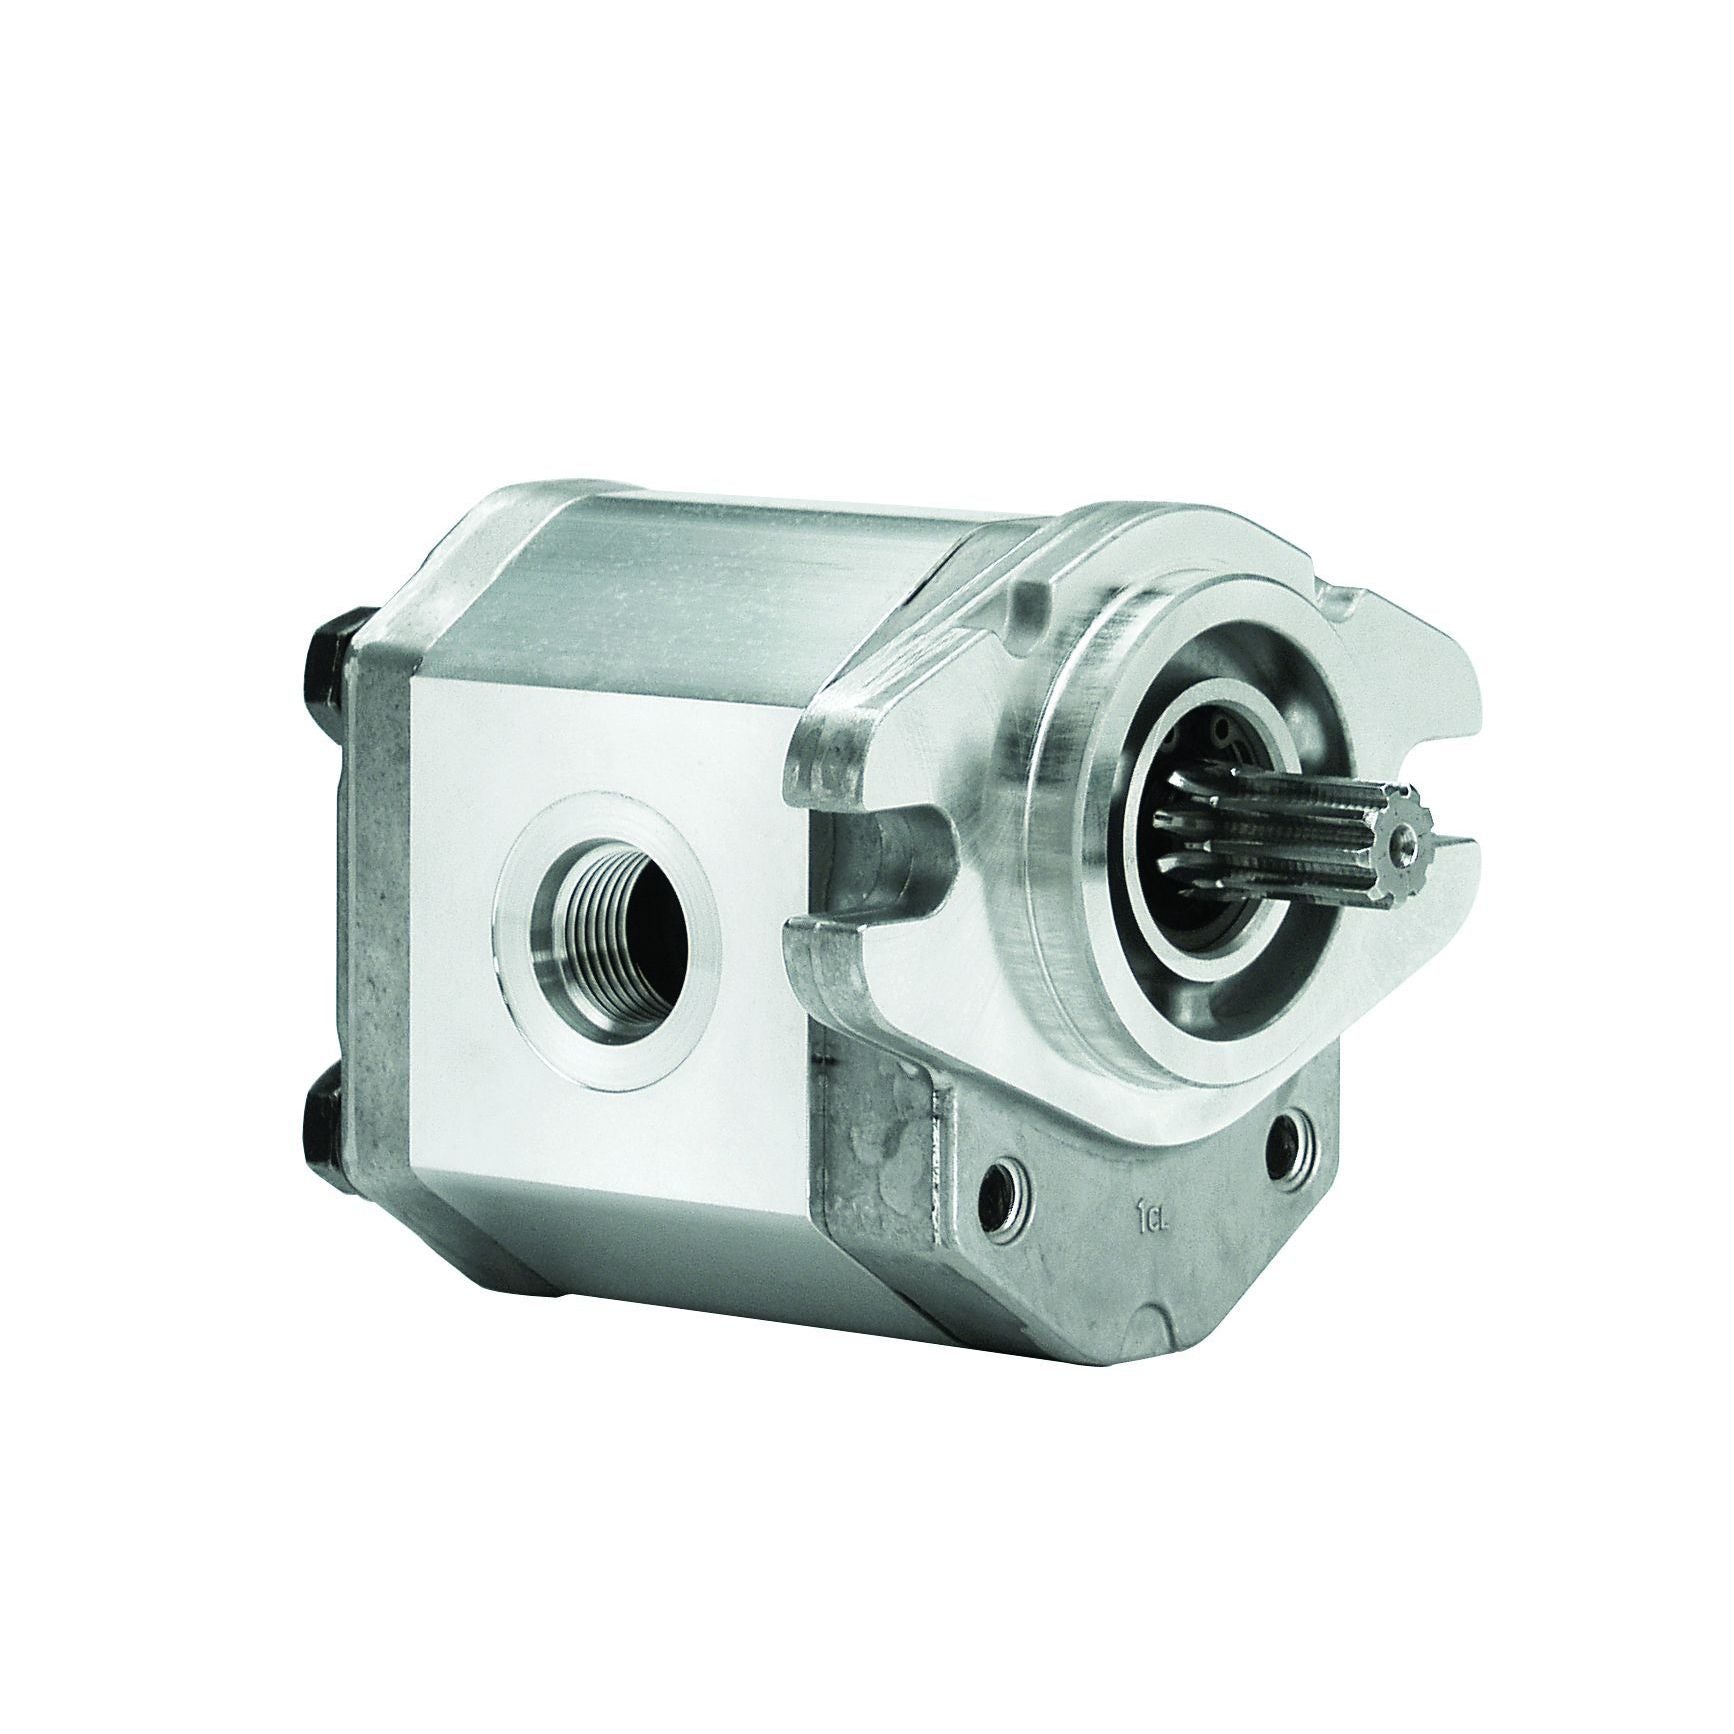 ALP2A-S-30-S1 : Marzocchi Gear Pump, CCW, 21.1cc (1.2871in3), 10.03 GPM, 2610psi, 2200 RPM, #12 SAE (3/4") In, #10 SAE (5/8") Out, Splined Shaft 9T 16/32DP, SAE A 2-Bolt Mount